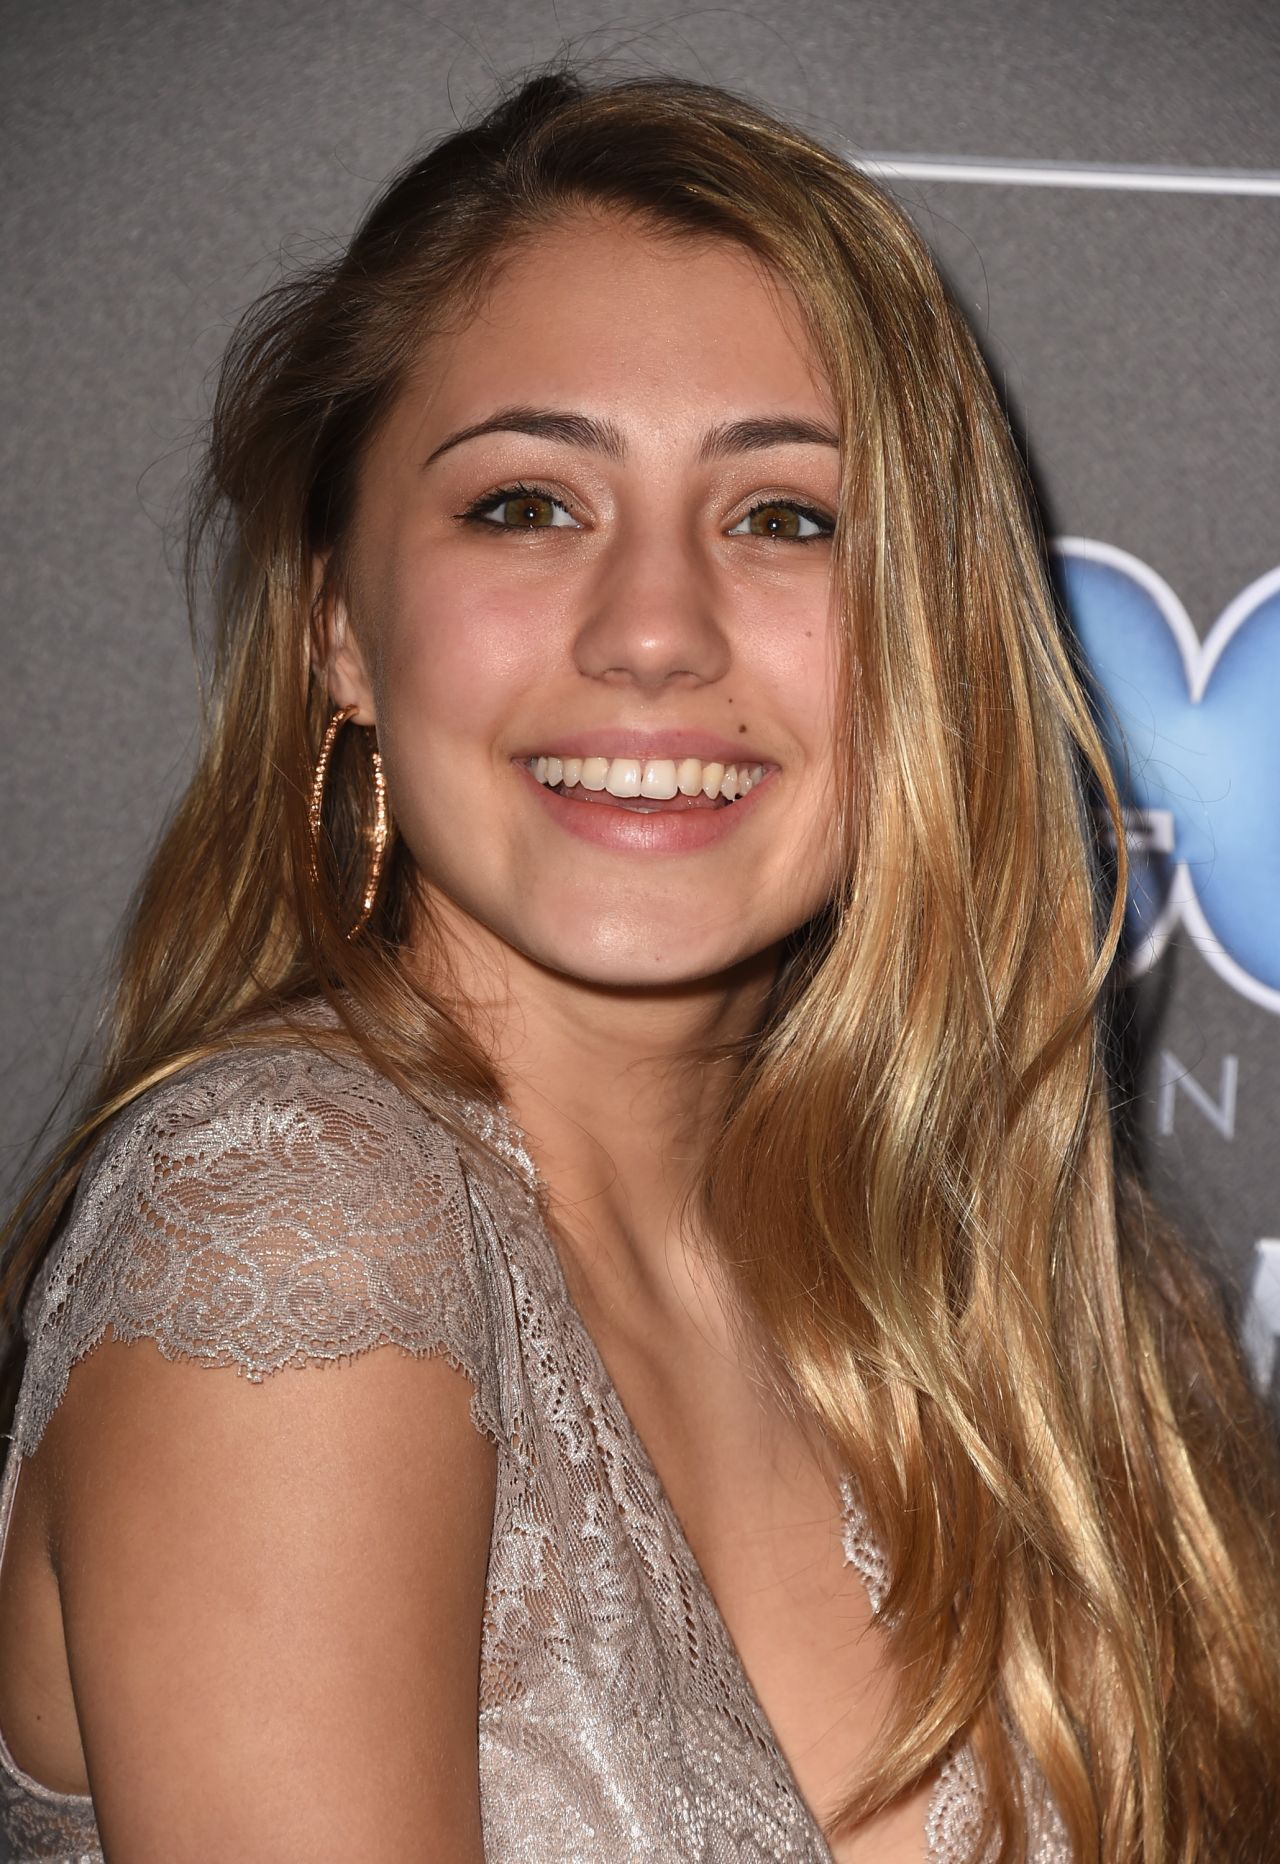 Lia Marie Johnson People Magazine Awards In Beverly Hills